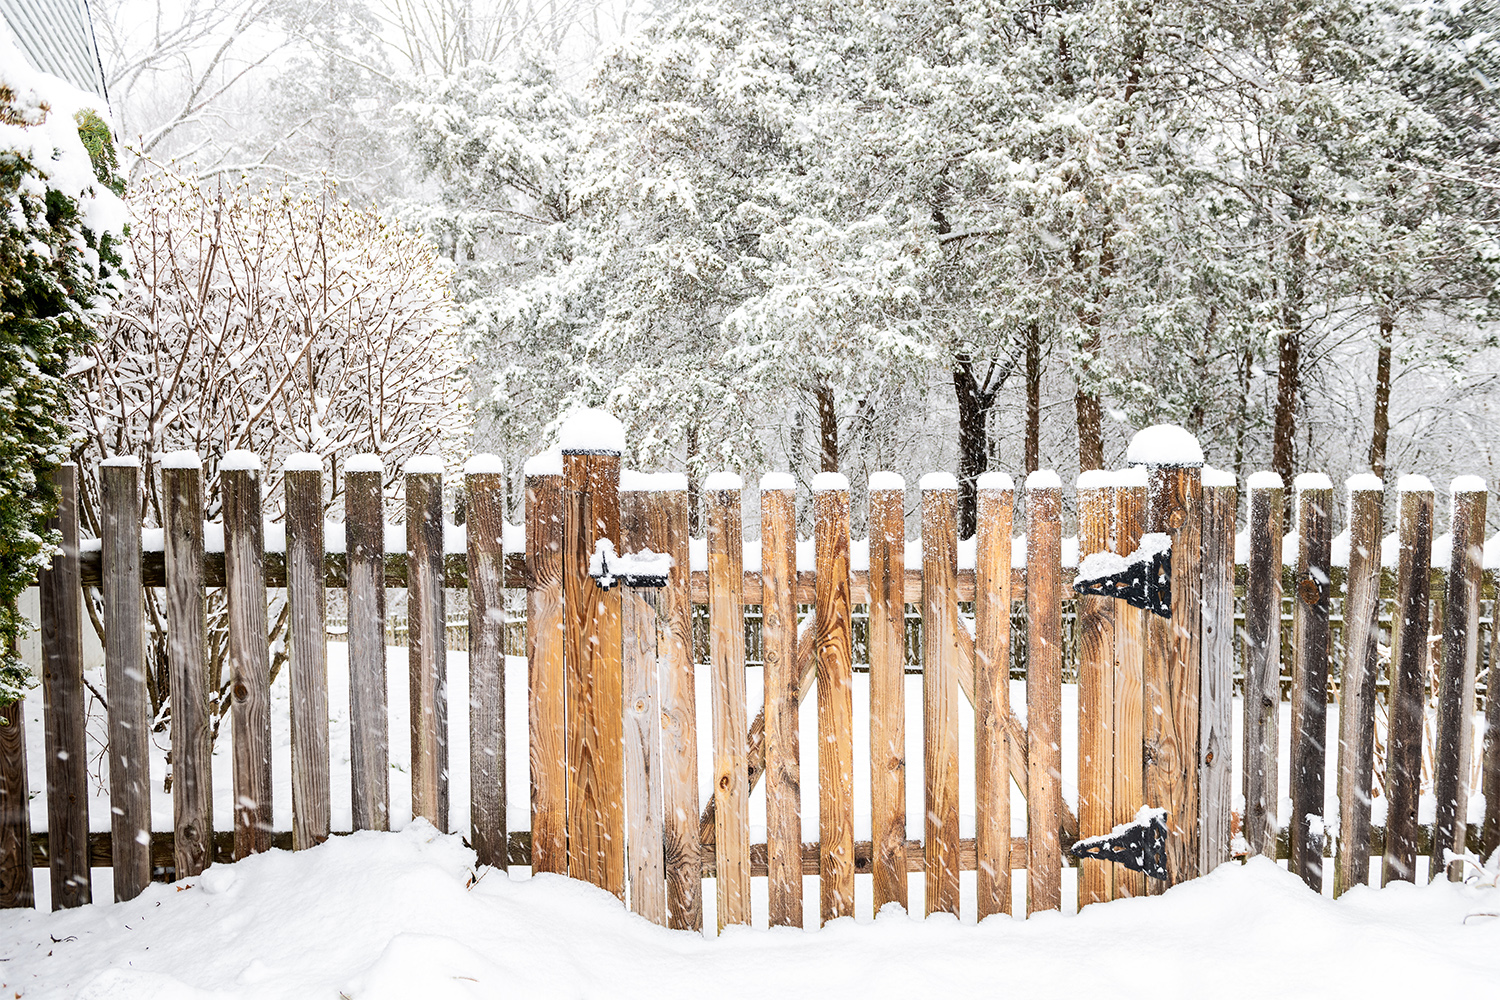 Wooden fence in snowfall